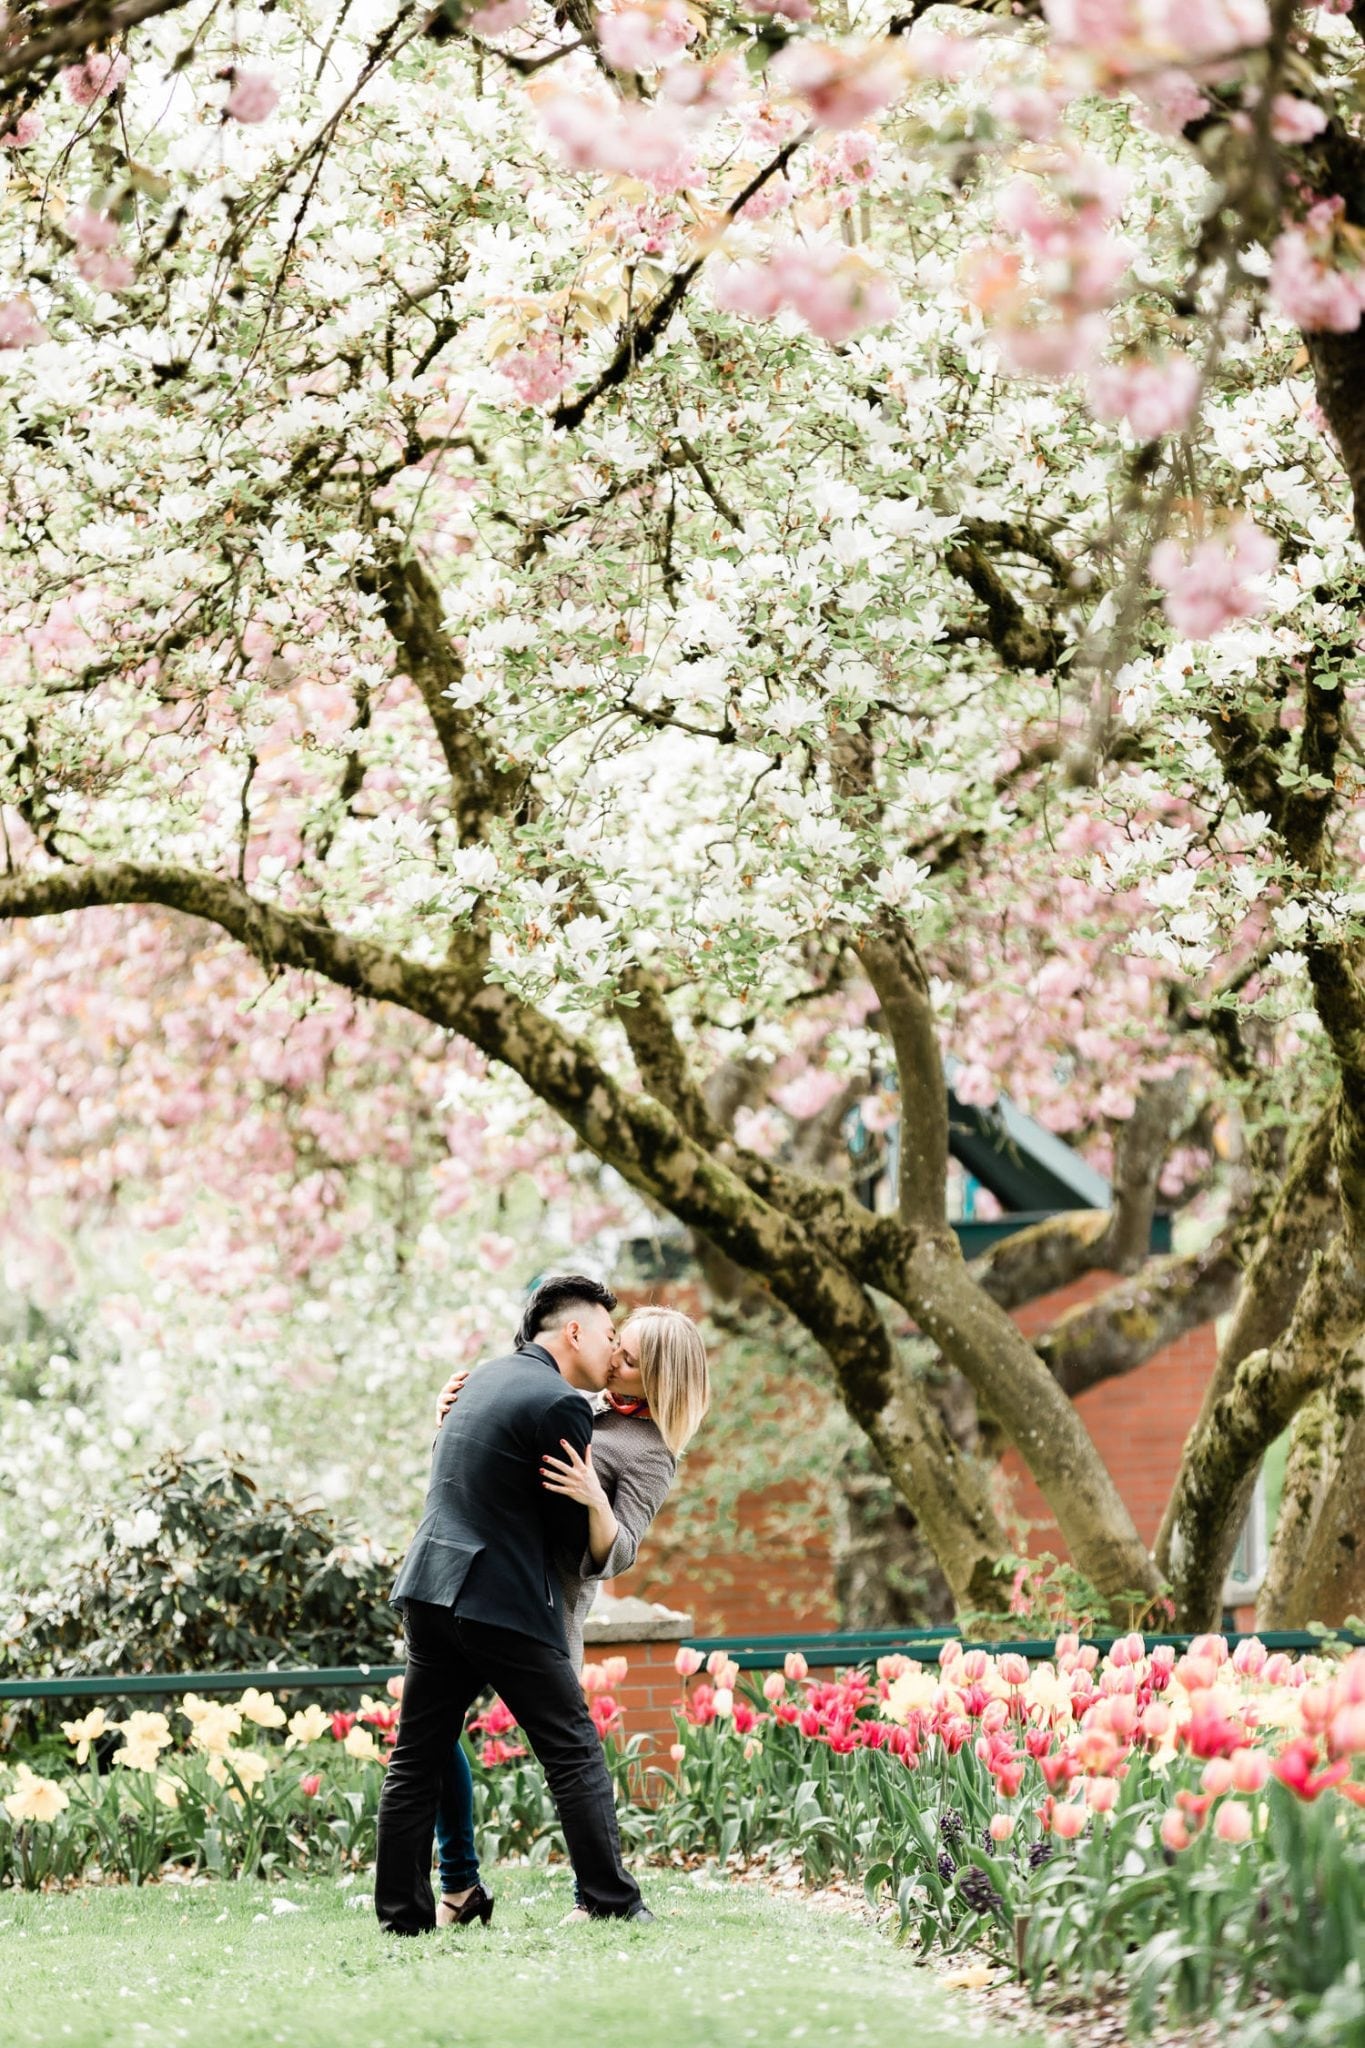 engaged couple kissing under the blossoming tree in the park for photo session